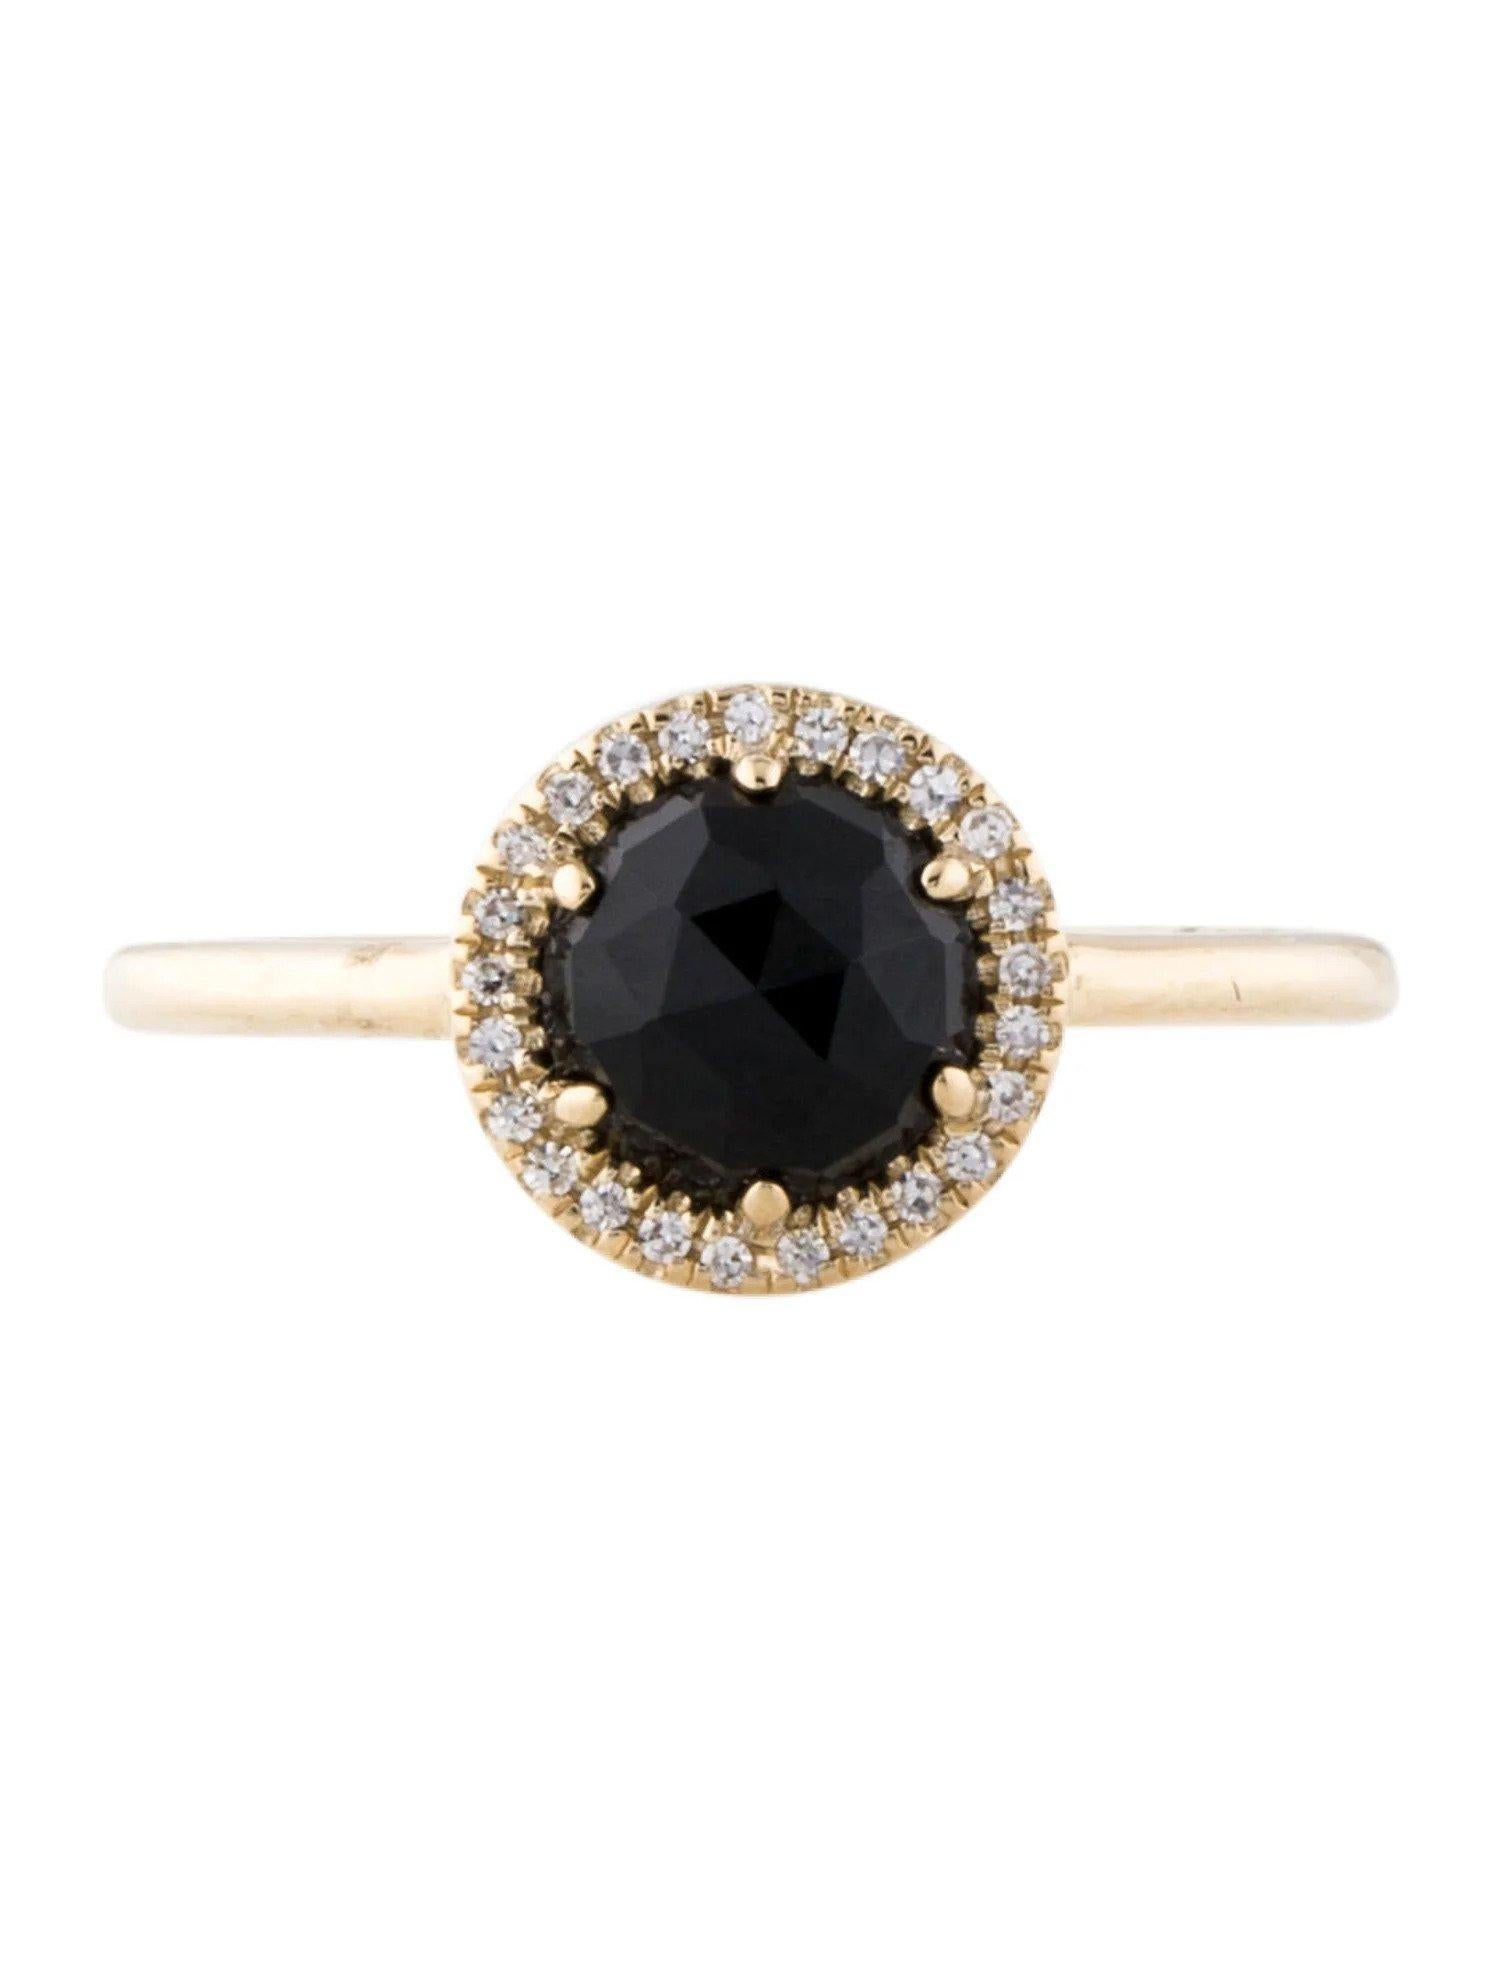 This Black Onyx & Diamond Ring is a stunning and timeless accessory that can add a touch of glamour and sophistication to any outfit. 

This ring features a 1.09 Carat Black Onyx, with a Diamond Halo comprised of 0.06 Carats of Single Cut Round